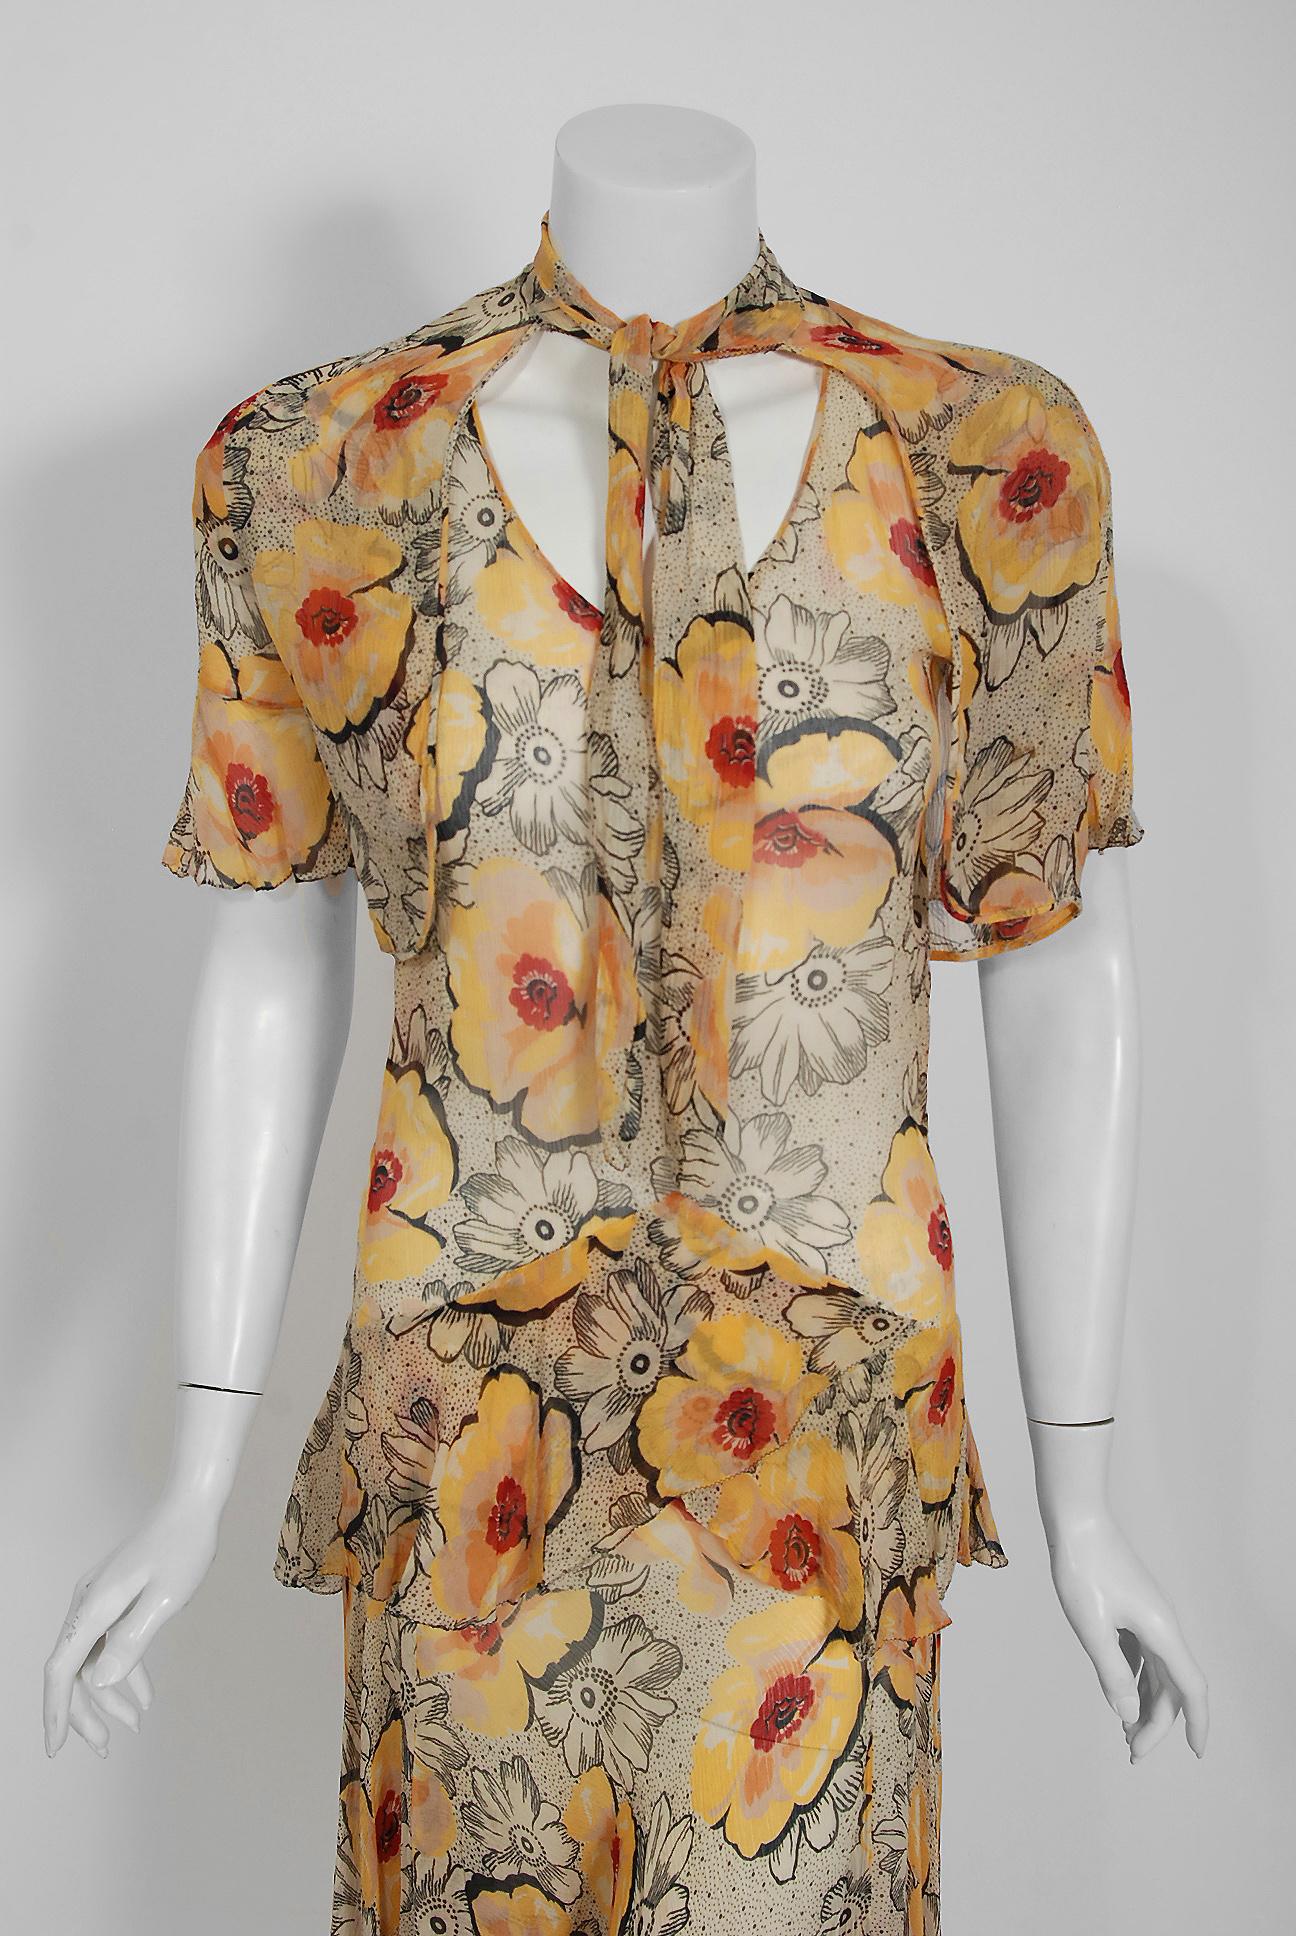 The breathtaking large-scale watercolor marigold poppy floral print used for this early 1930's crepe chiffon ensemble has a fresh innocence that I find irresistible. The bodice has an elegant short-sleeve plunge with bias-cut shaping. The matching